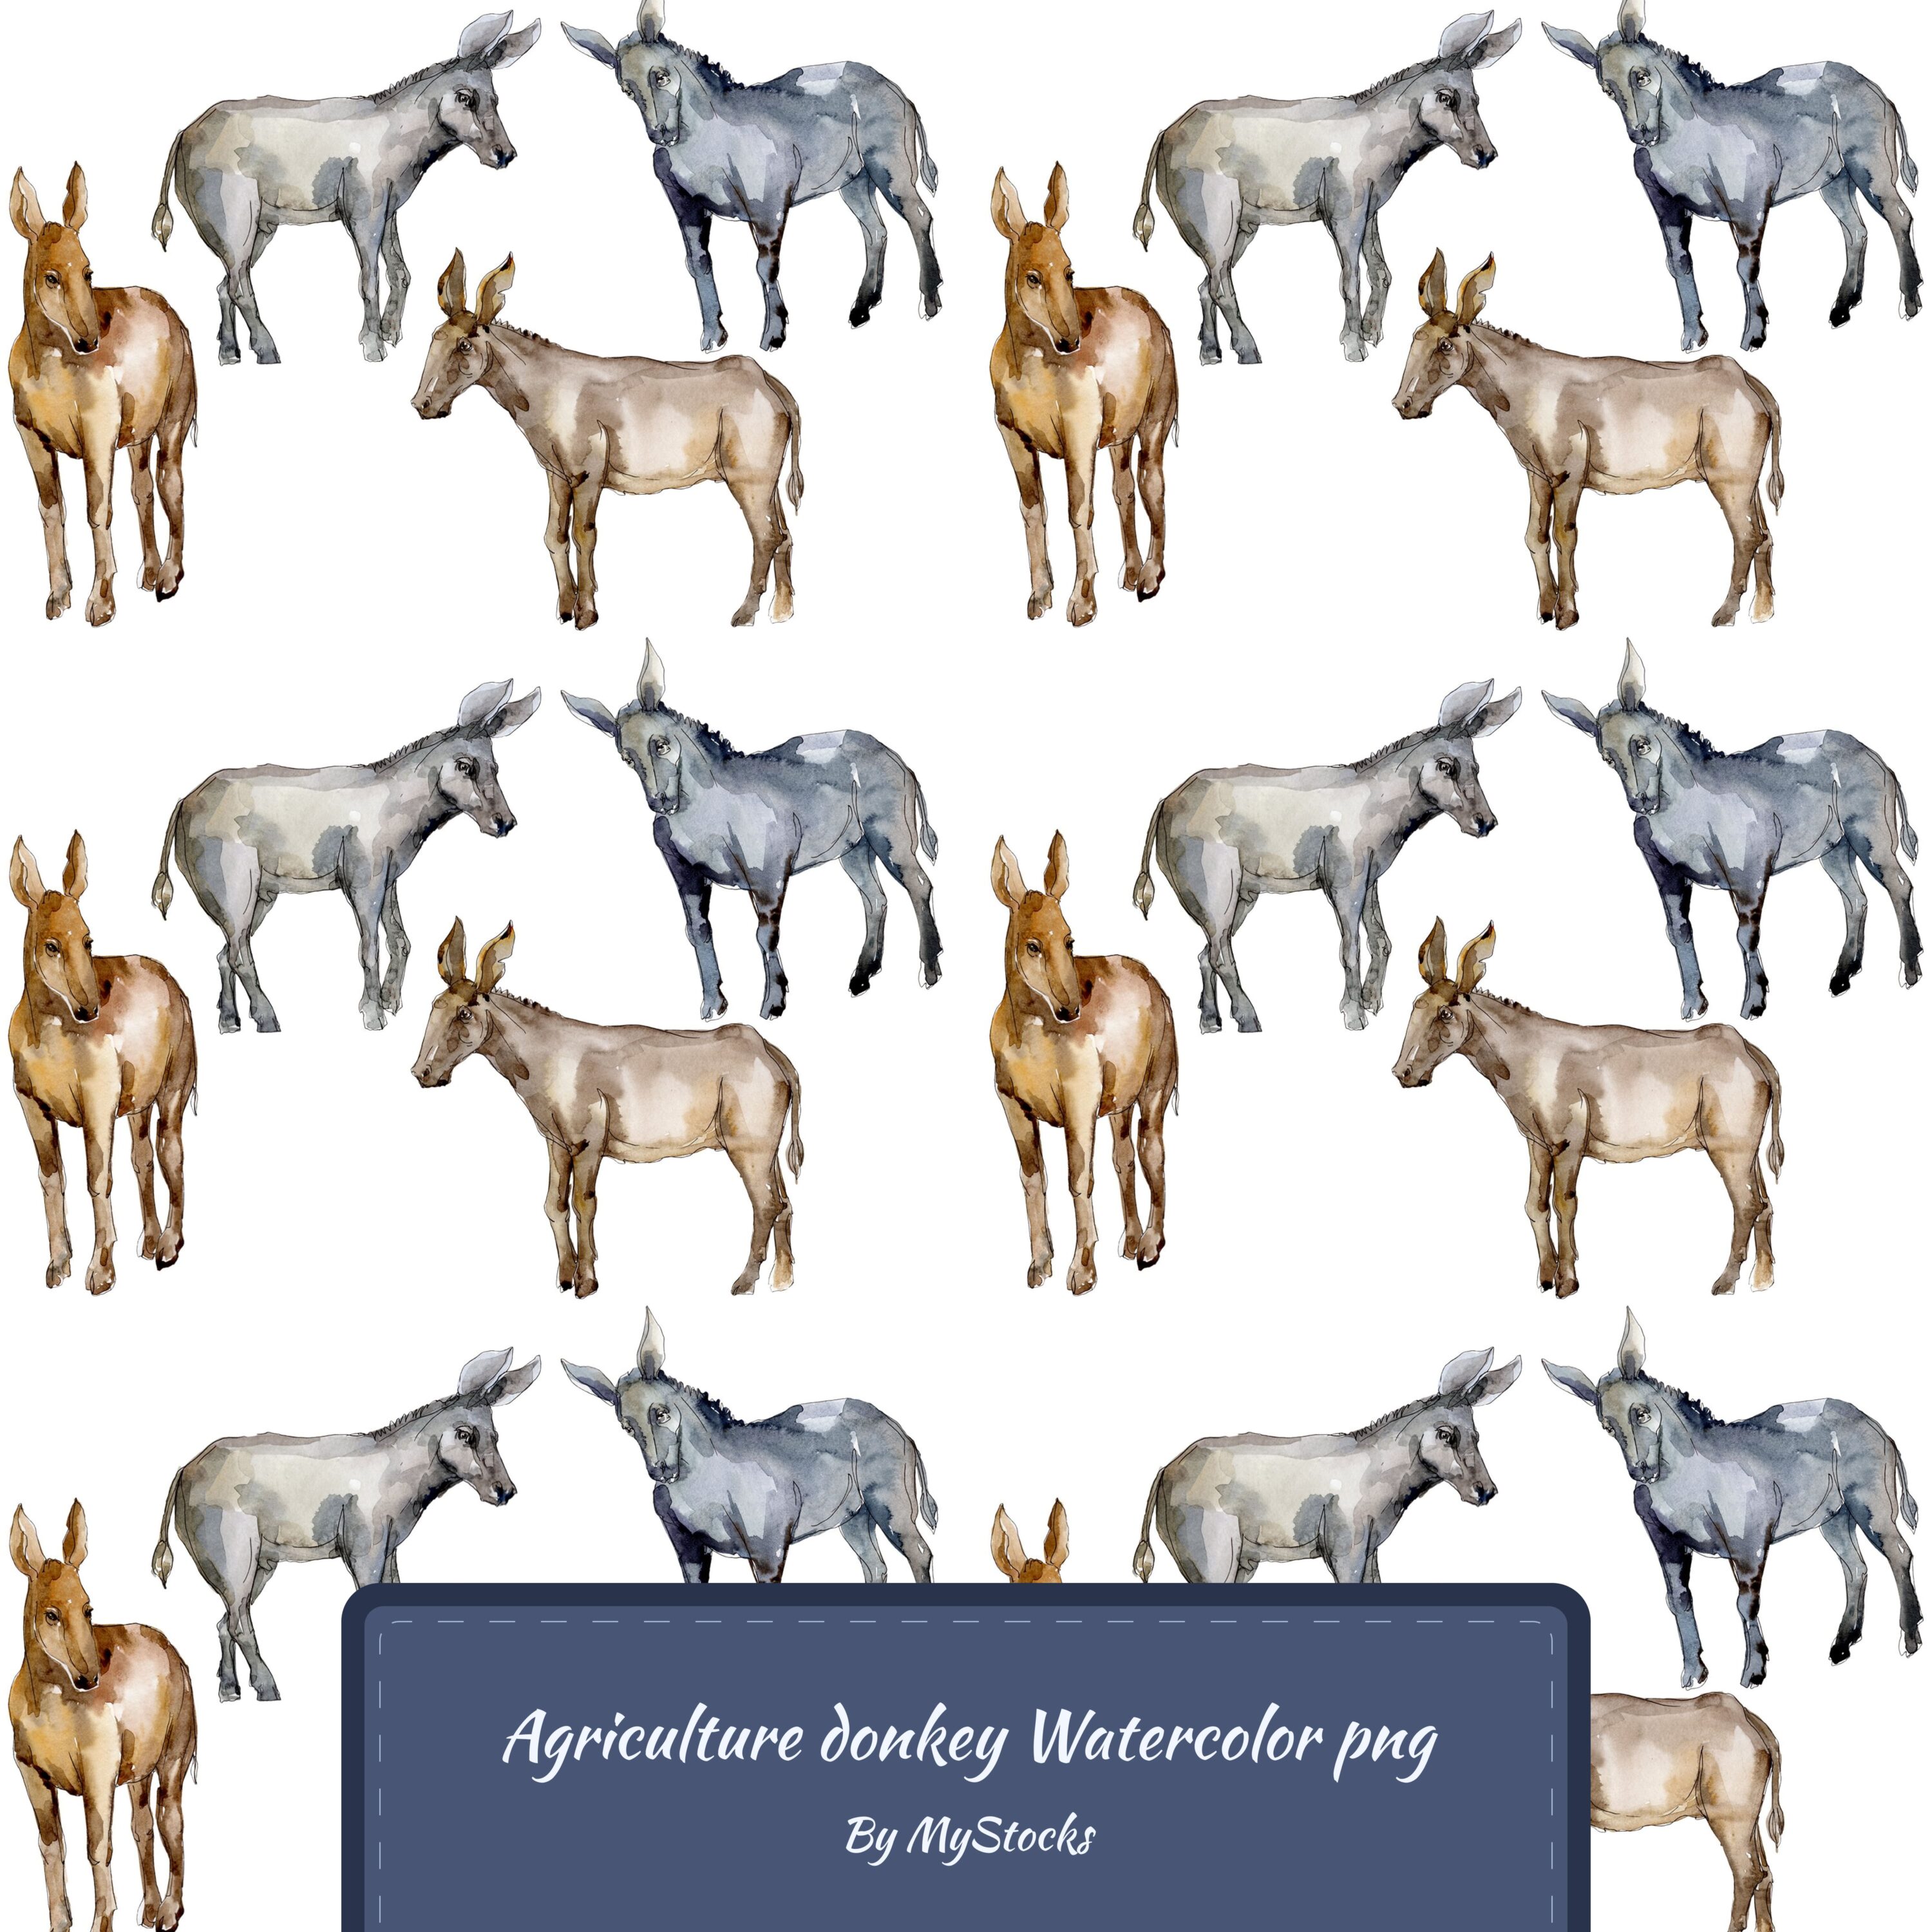 Agriculture donkey Watercolor png.